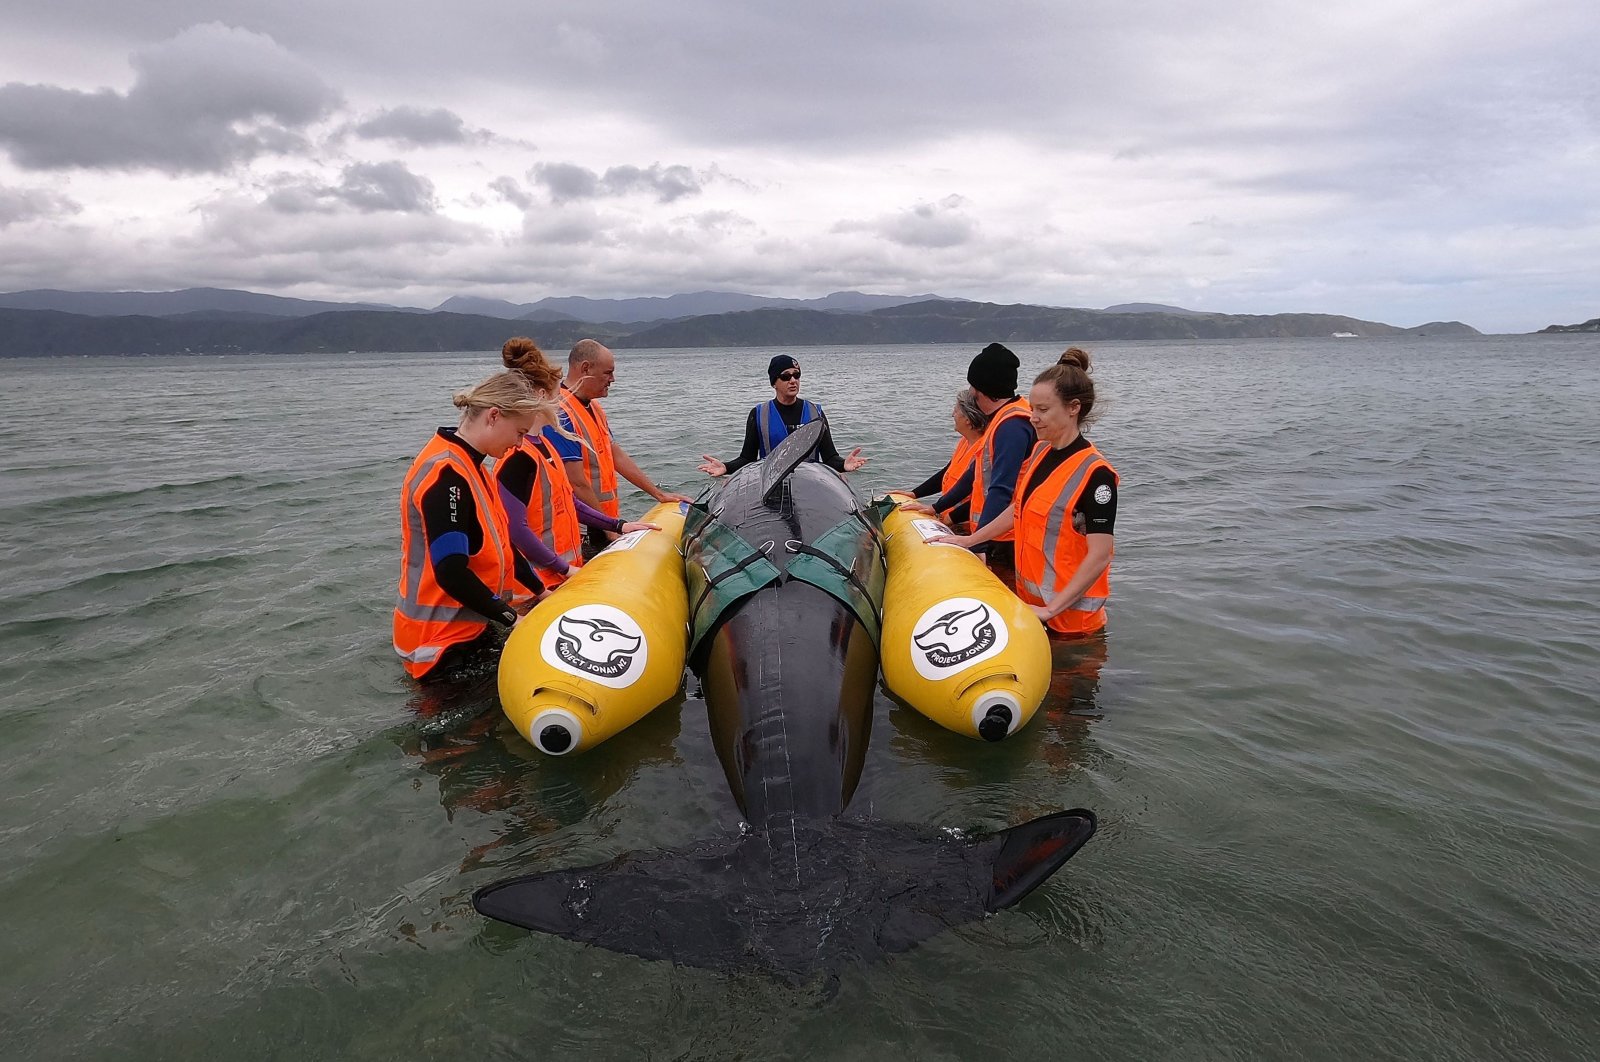 A group of volunteers from New Zealand whale rescue charity Project Jonah are taught how to save a stranded whale by a group instructor, at Scorching Bay in Wellington, Dec. 11, 2021. (AFP Photo)